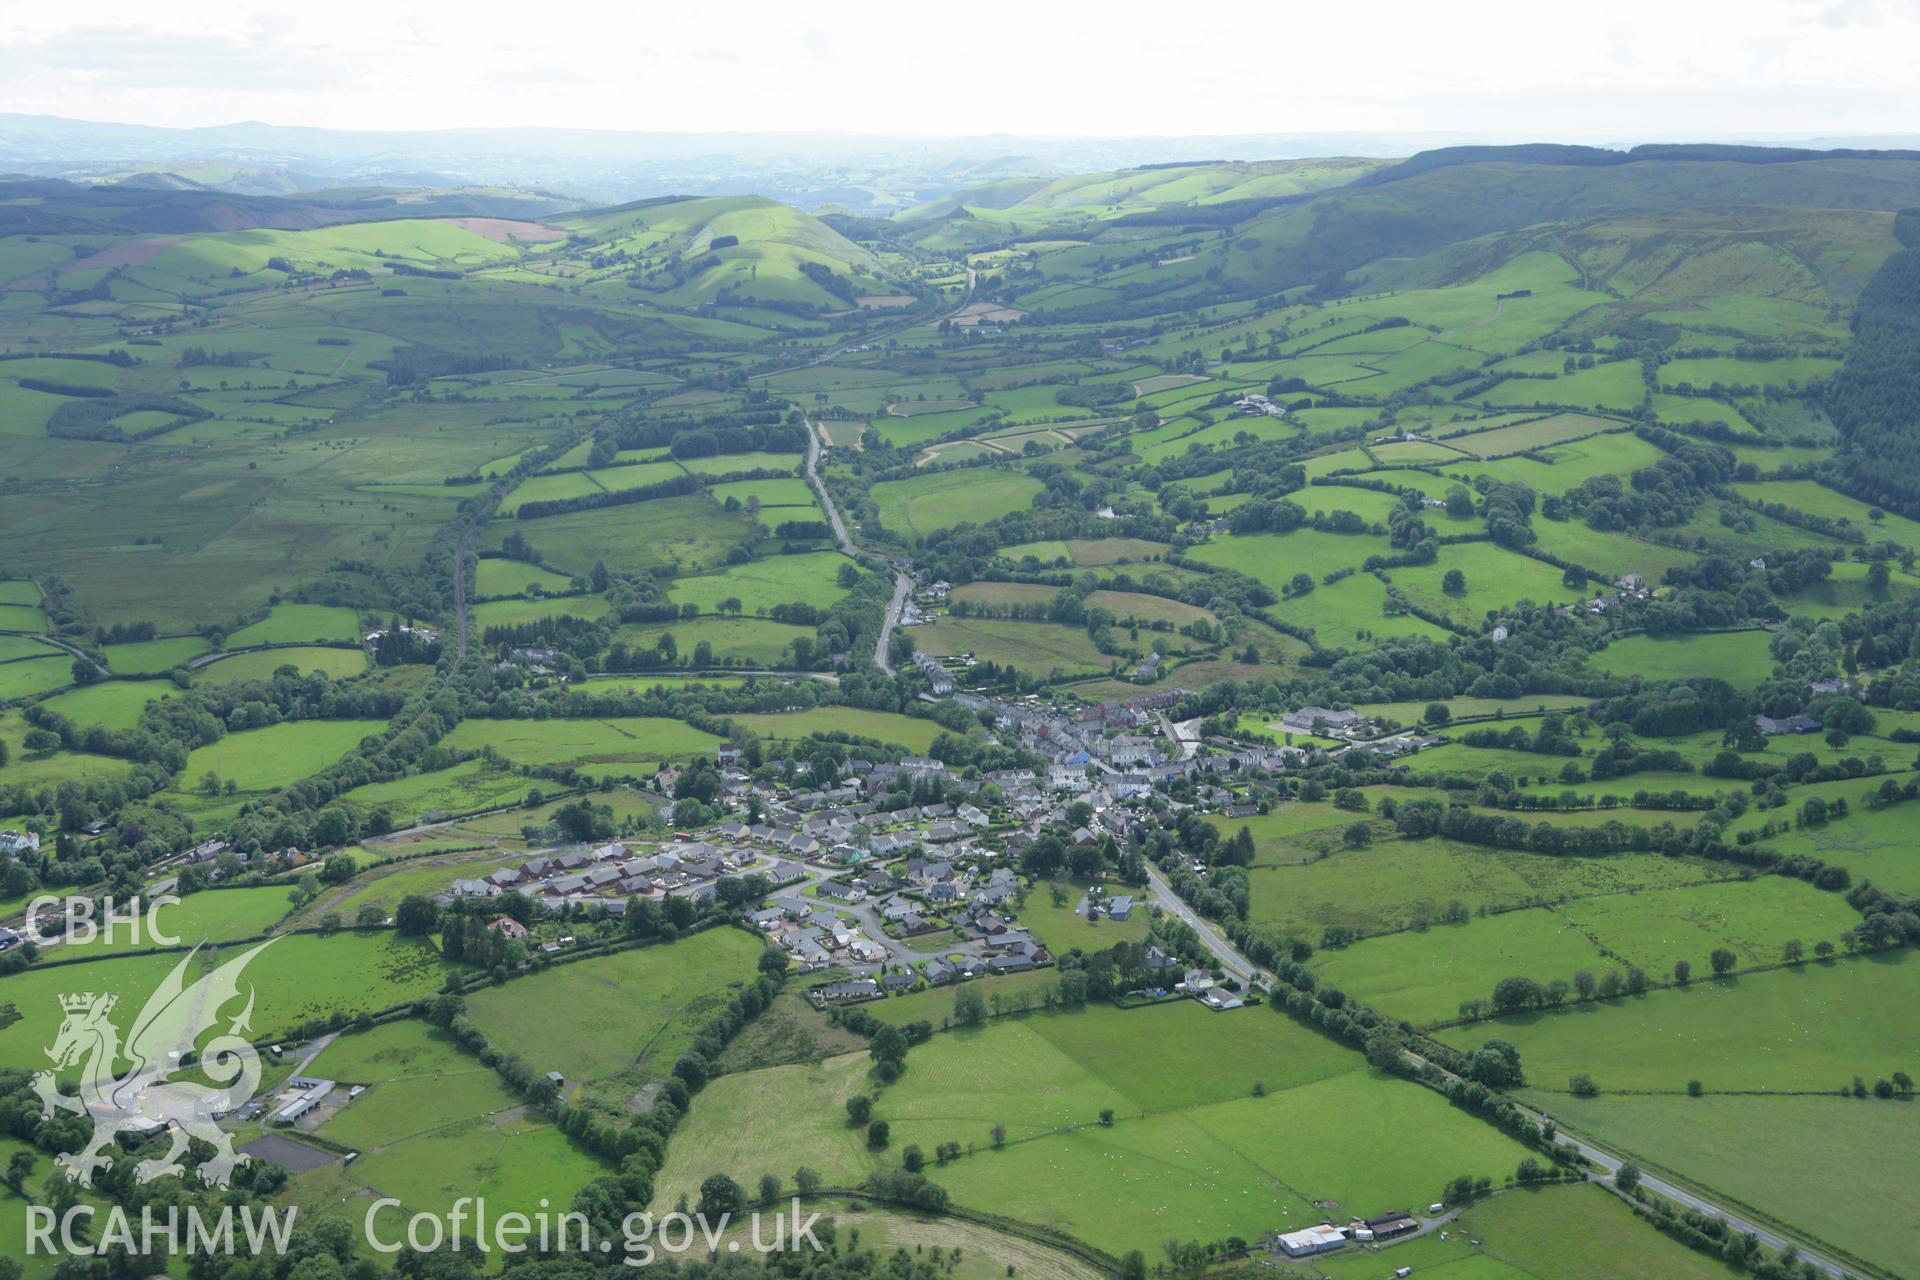 RCAHMW colour oblique aerial photograph of Llanwrtyd Wells. Taken on 09 July 2007 by Toby Driver